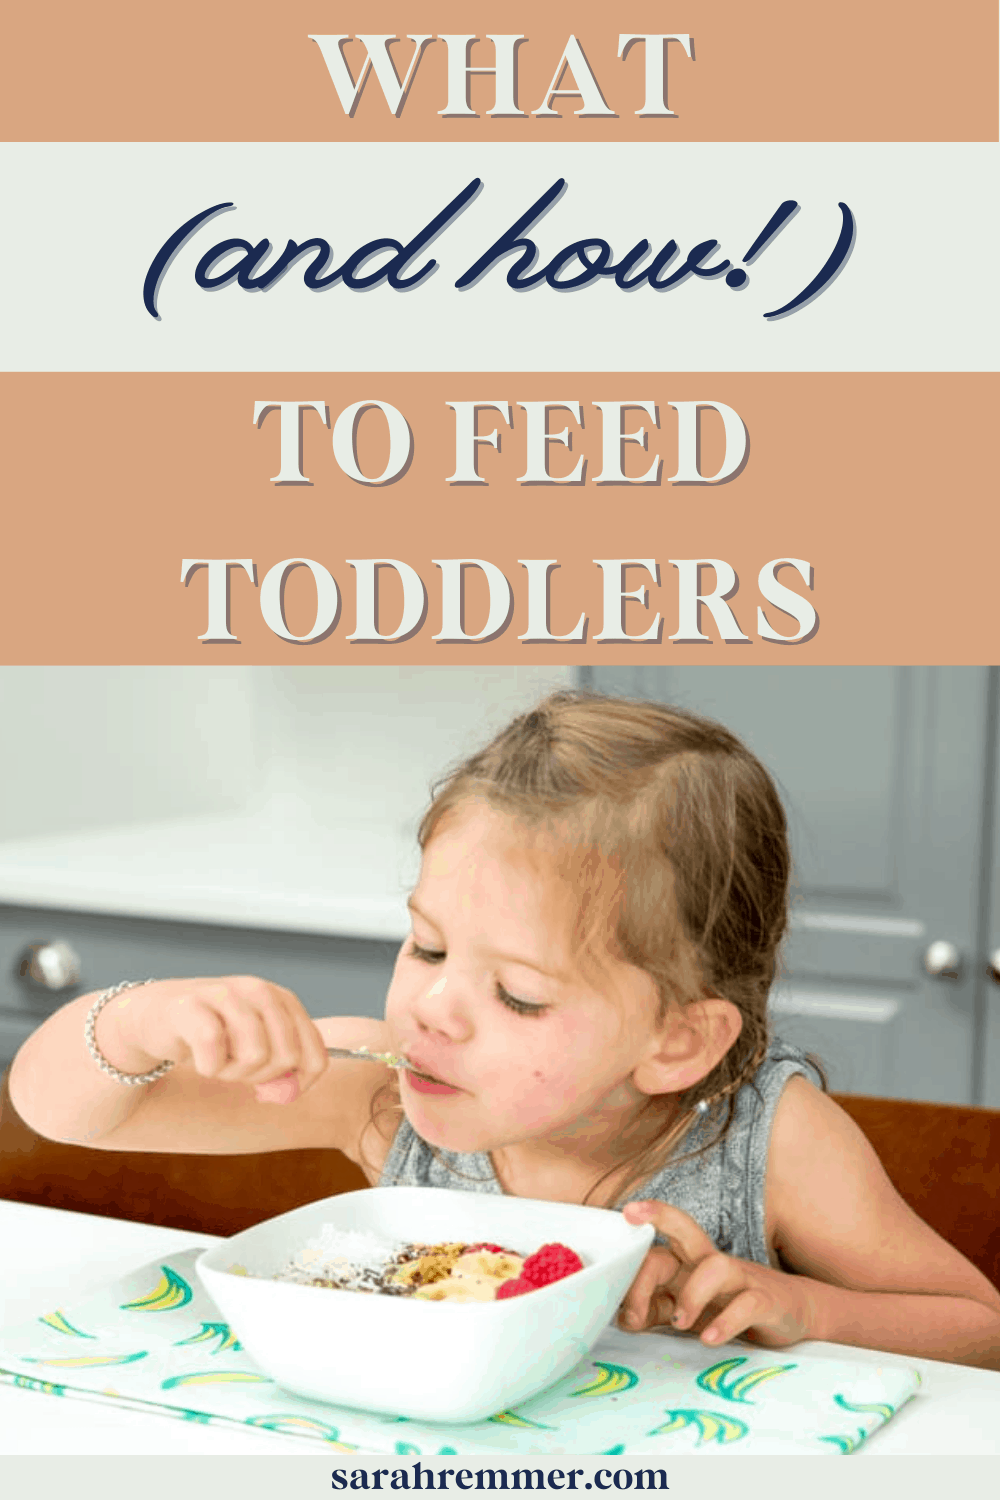 Let’s dive in on what and how to feed toddlers! Specifically, the best foods and meals for toddlers and how much they should eat in a day to promote growth and healthy development! 